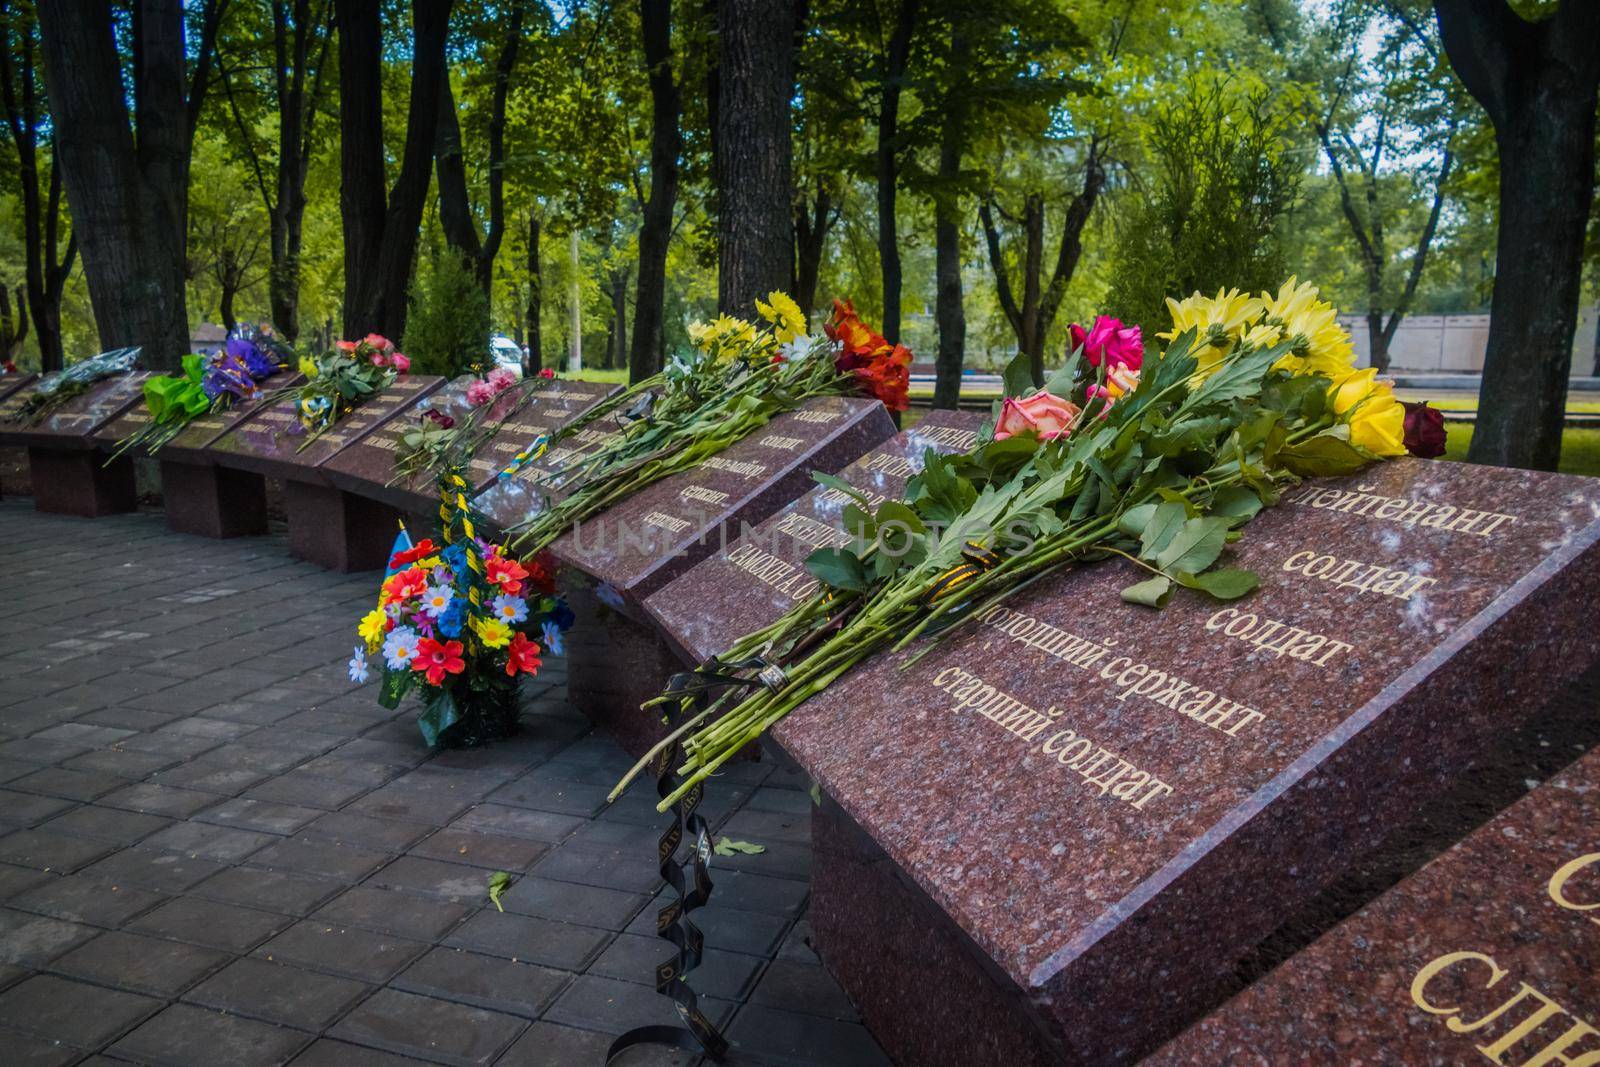 Krivoy Rog, Ukraine - may 18, 2020: A man with flowers near the memorial to fallen soldiers - defenders of Ukraine while honoring the memory of those killed in the battles for Debaltseve. by mosfet_ua